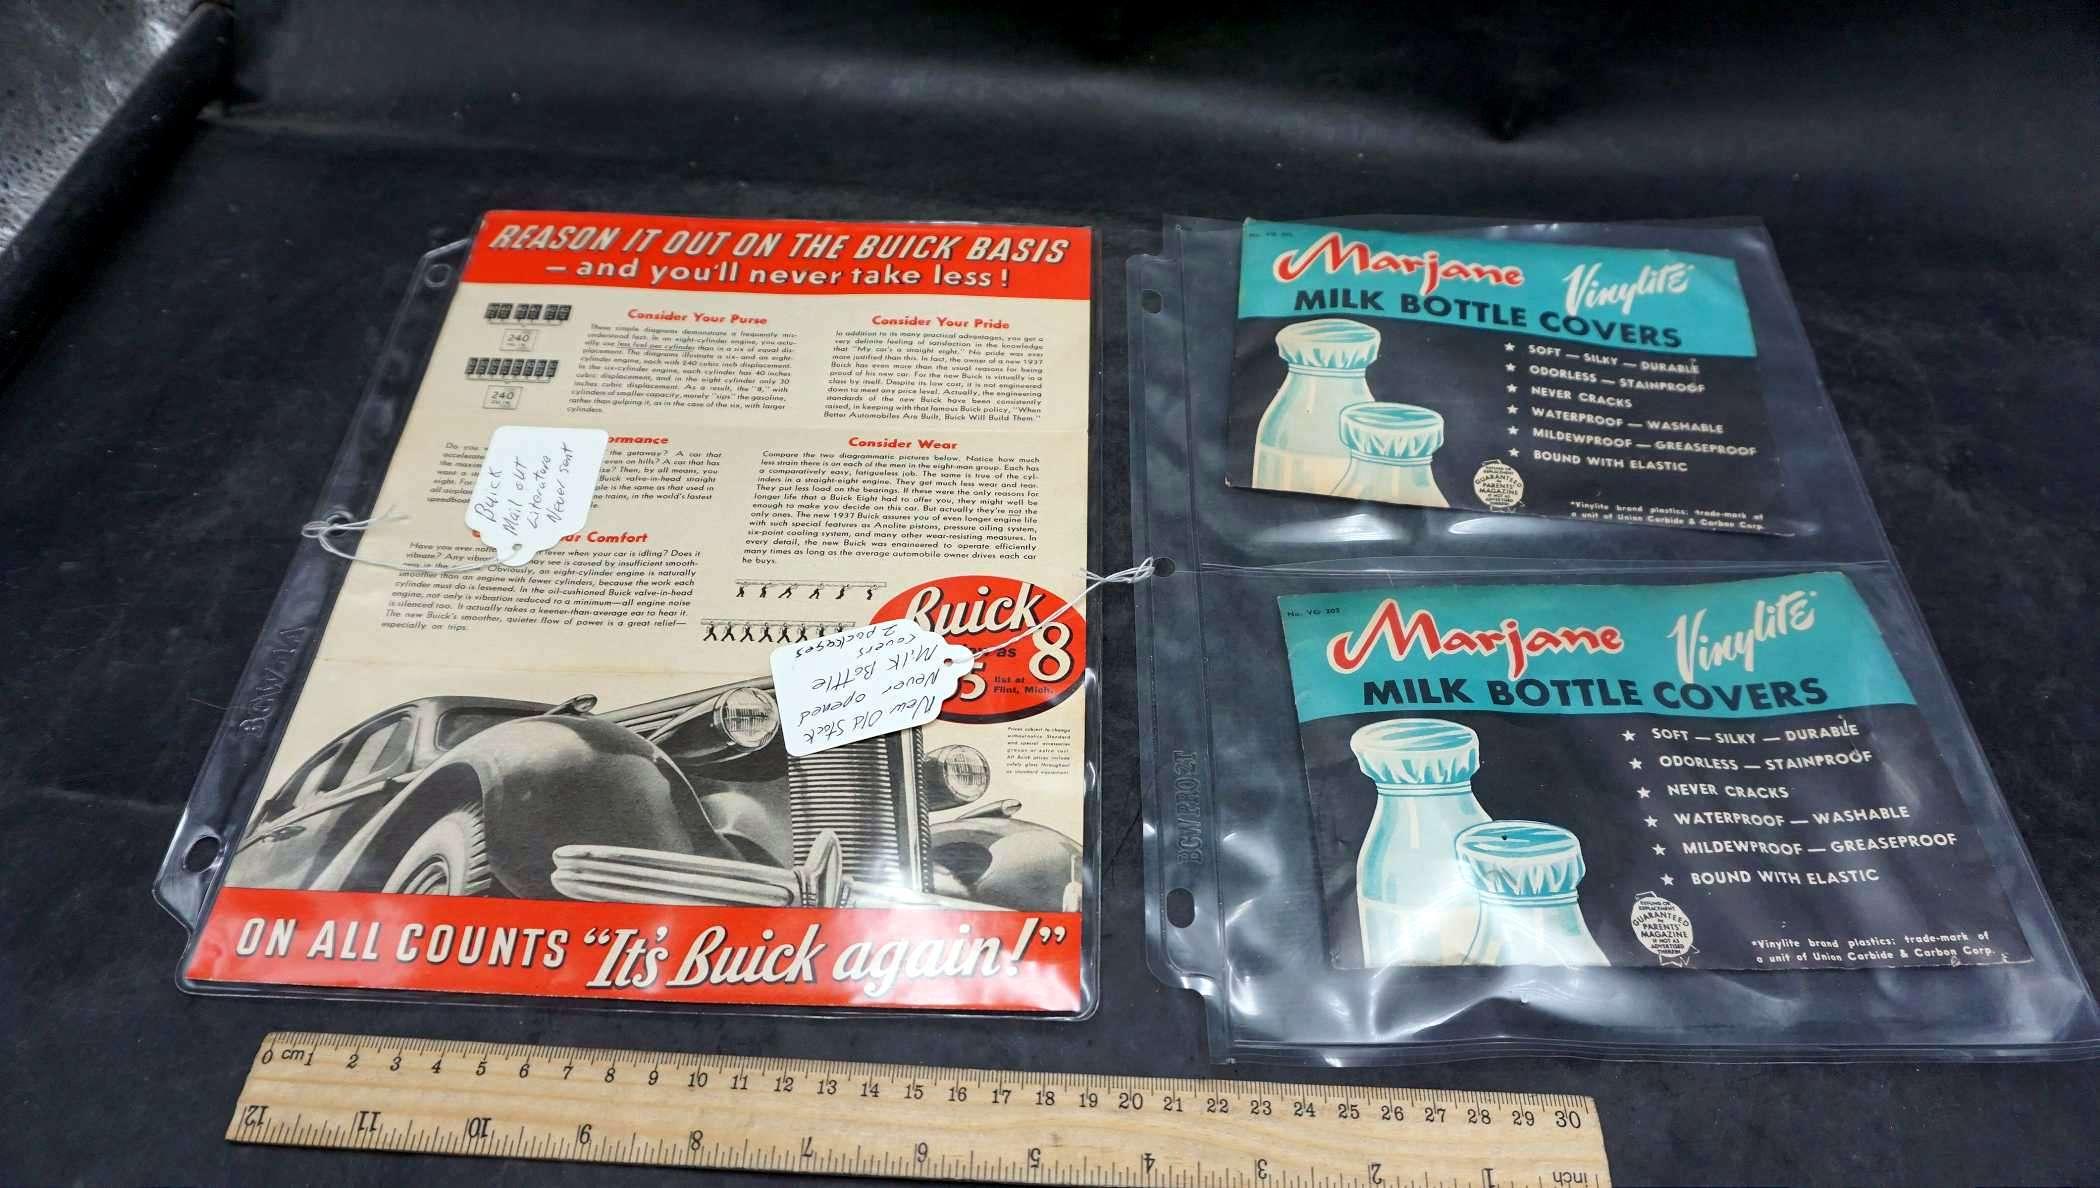 Buick Mail Out Advertising & Marjane Milk Bottle Covers